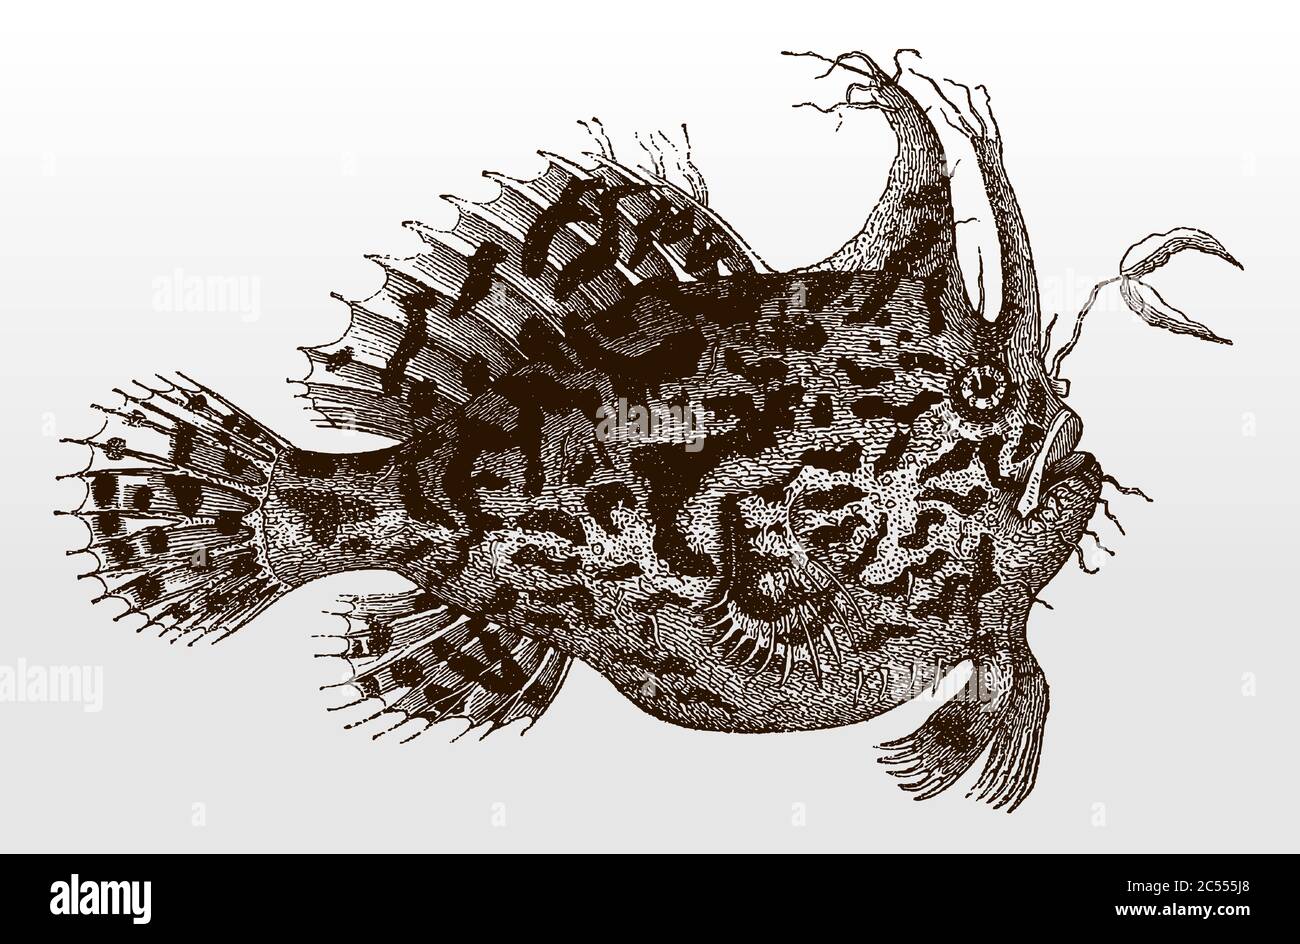 Strange-looking sargassum fish, anglerfish or frog fish, histrio from the atlantic ocean after an antique illustration from the 19th century Stock Vector